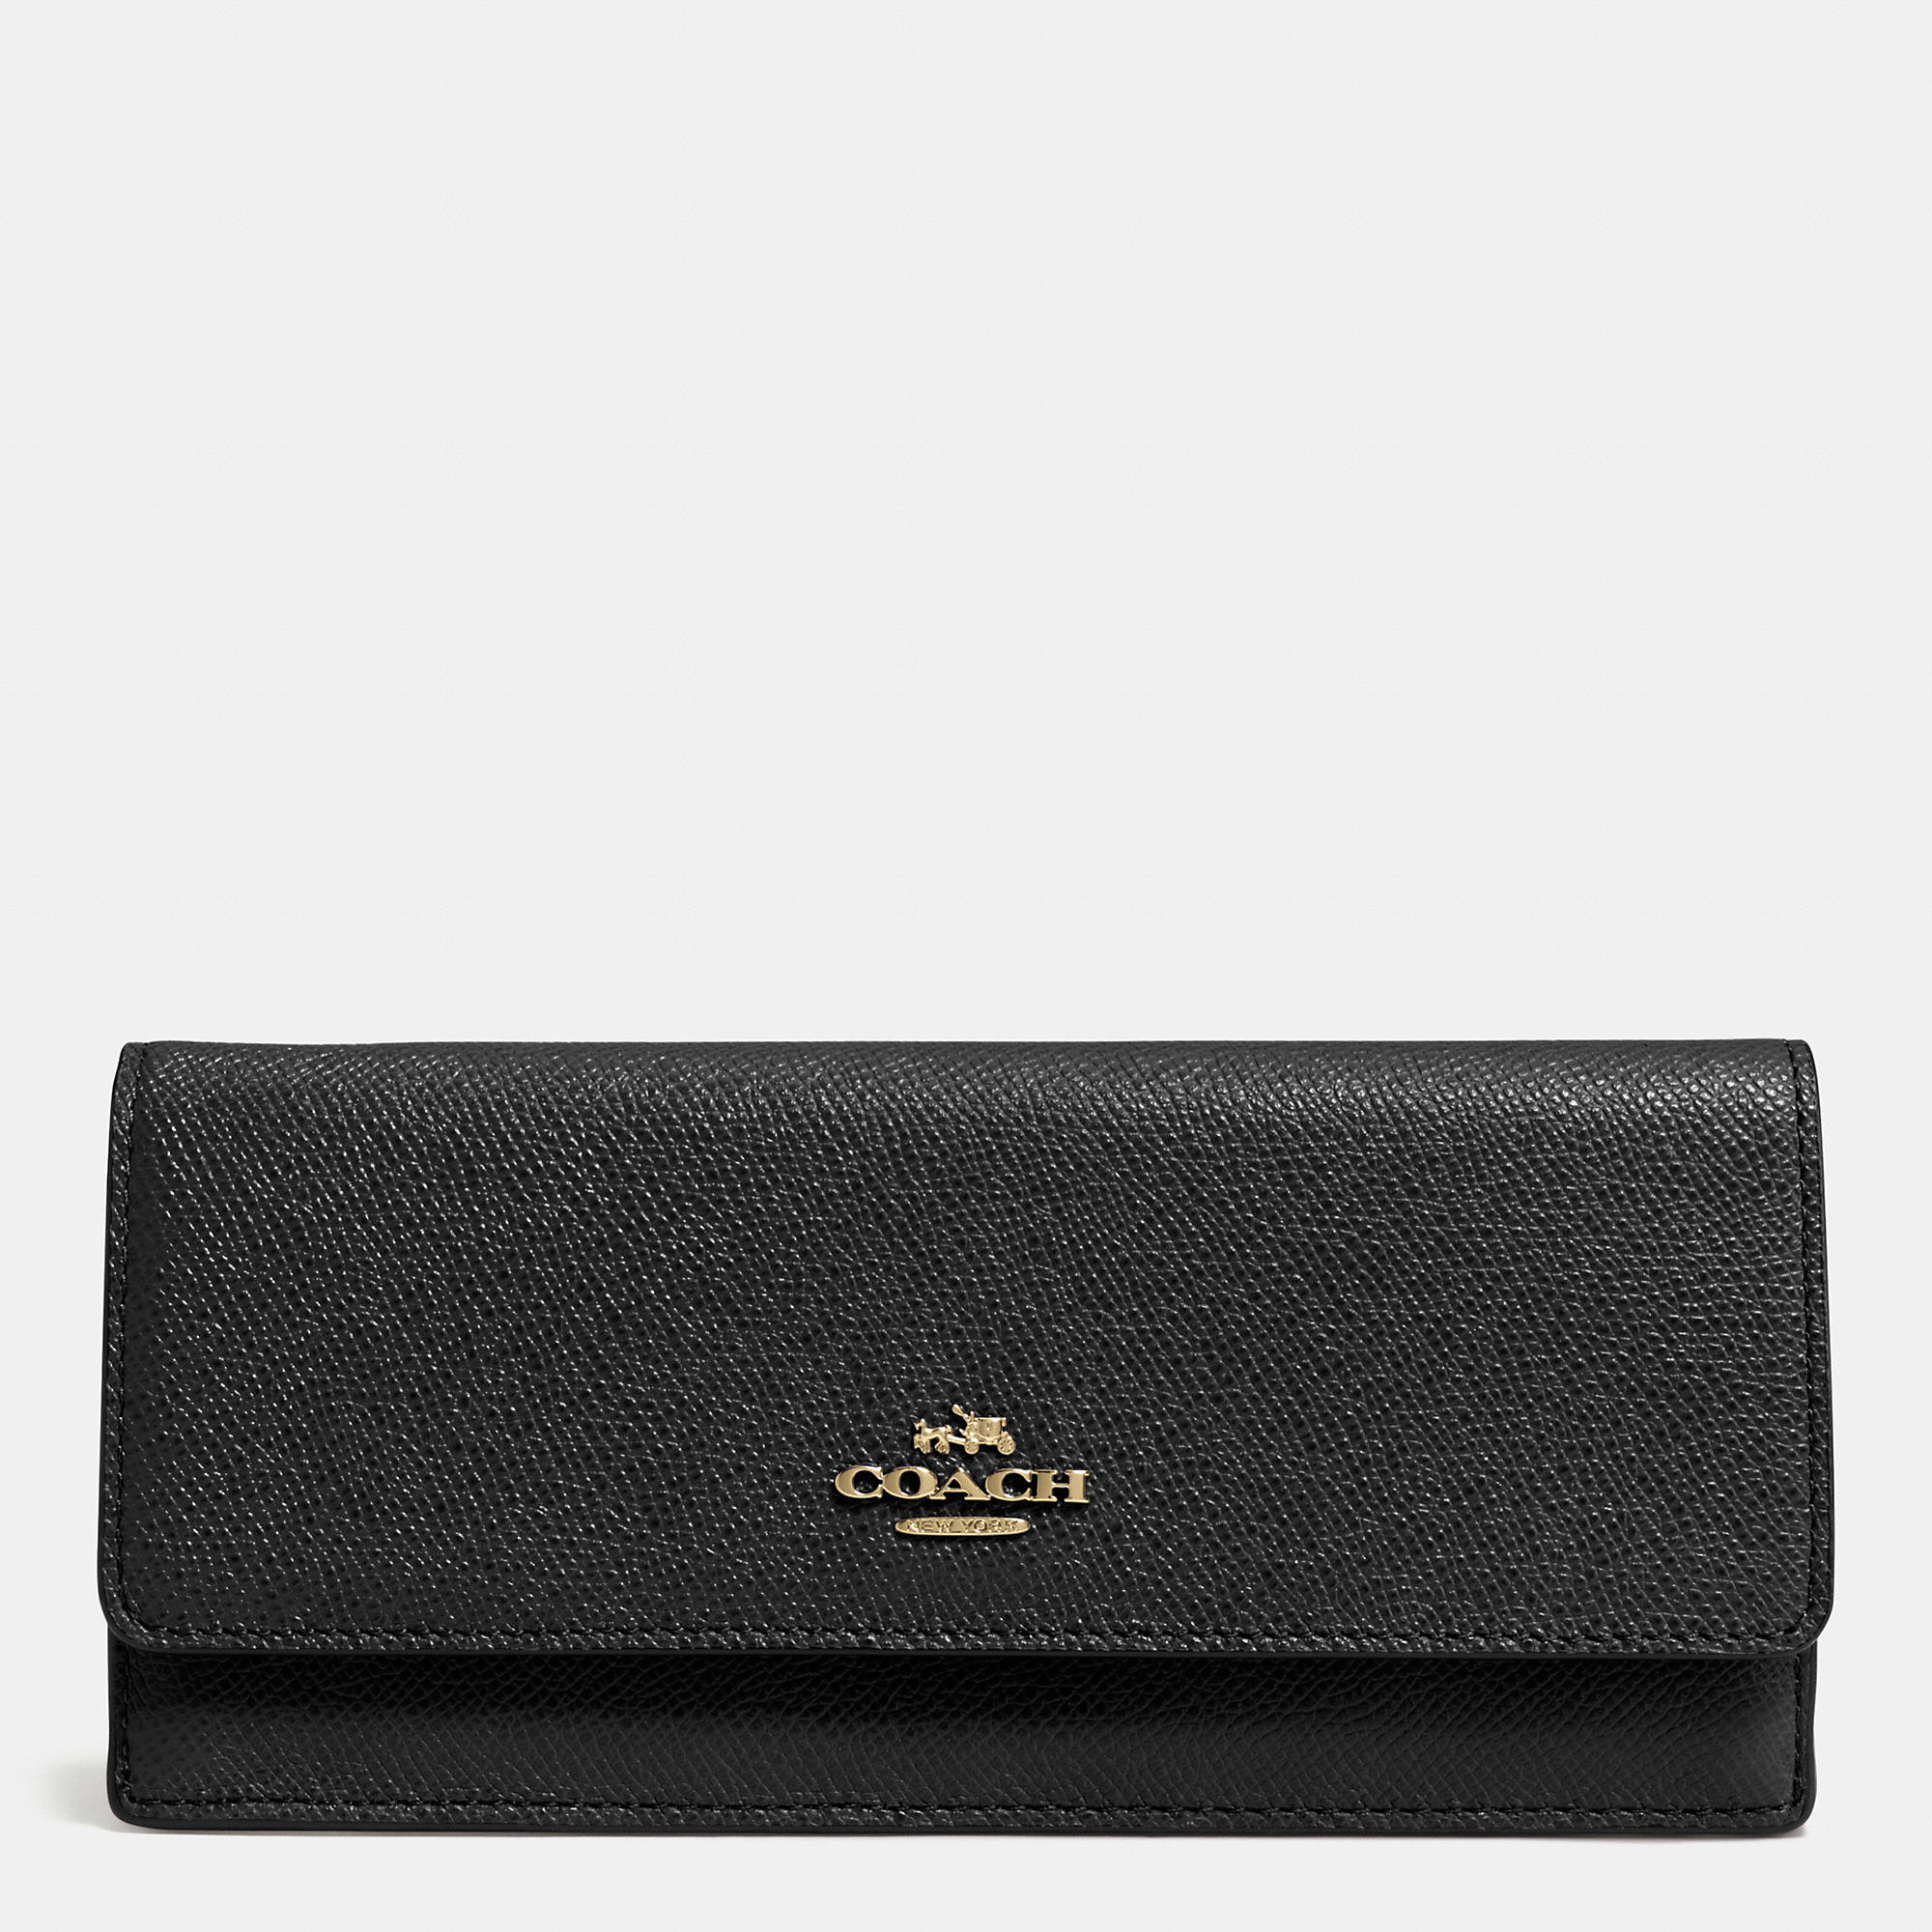 Lyst - Coach Soft Wallet In Embossed Textured Leather in Black